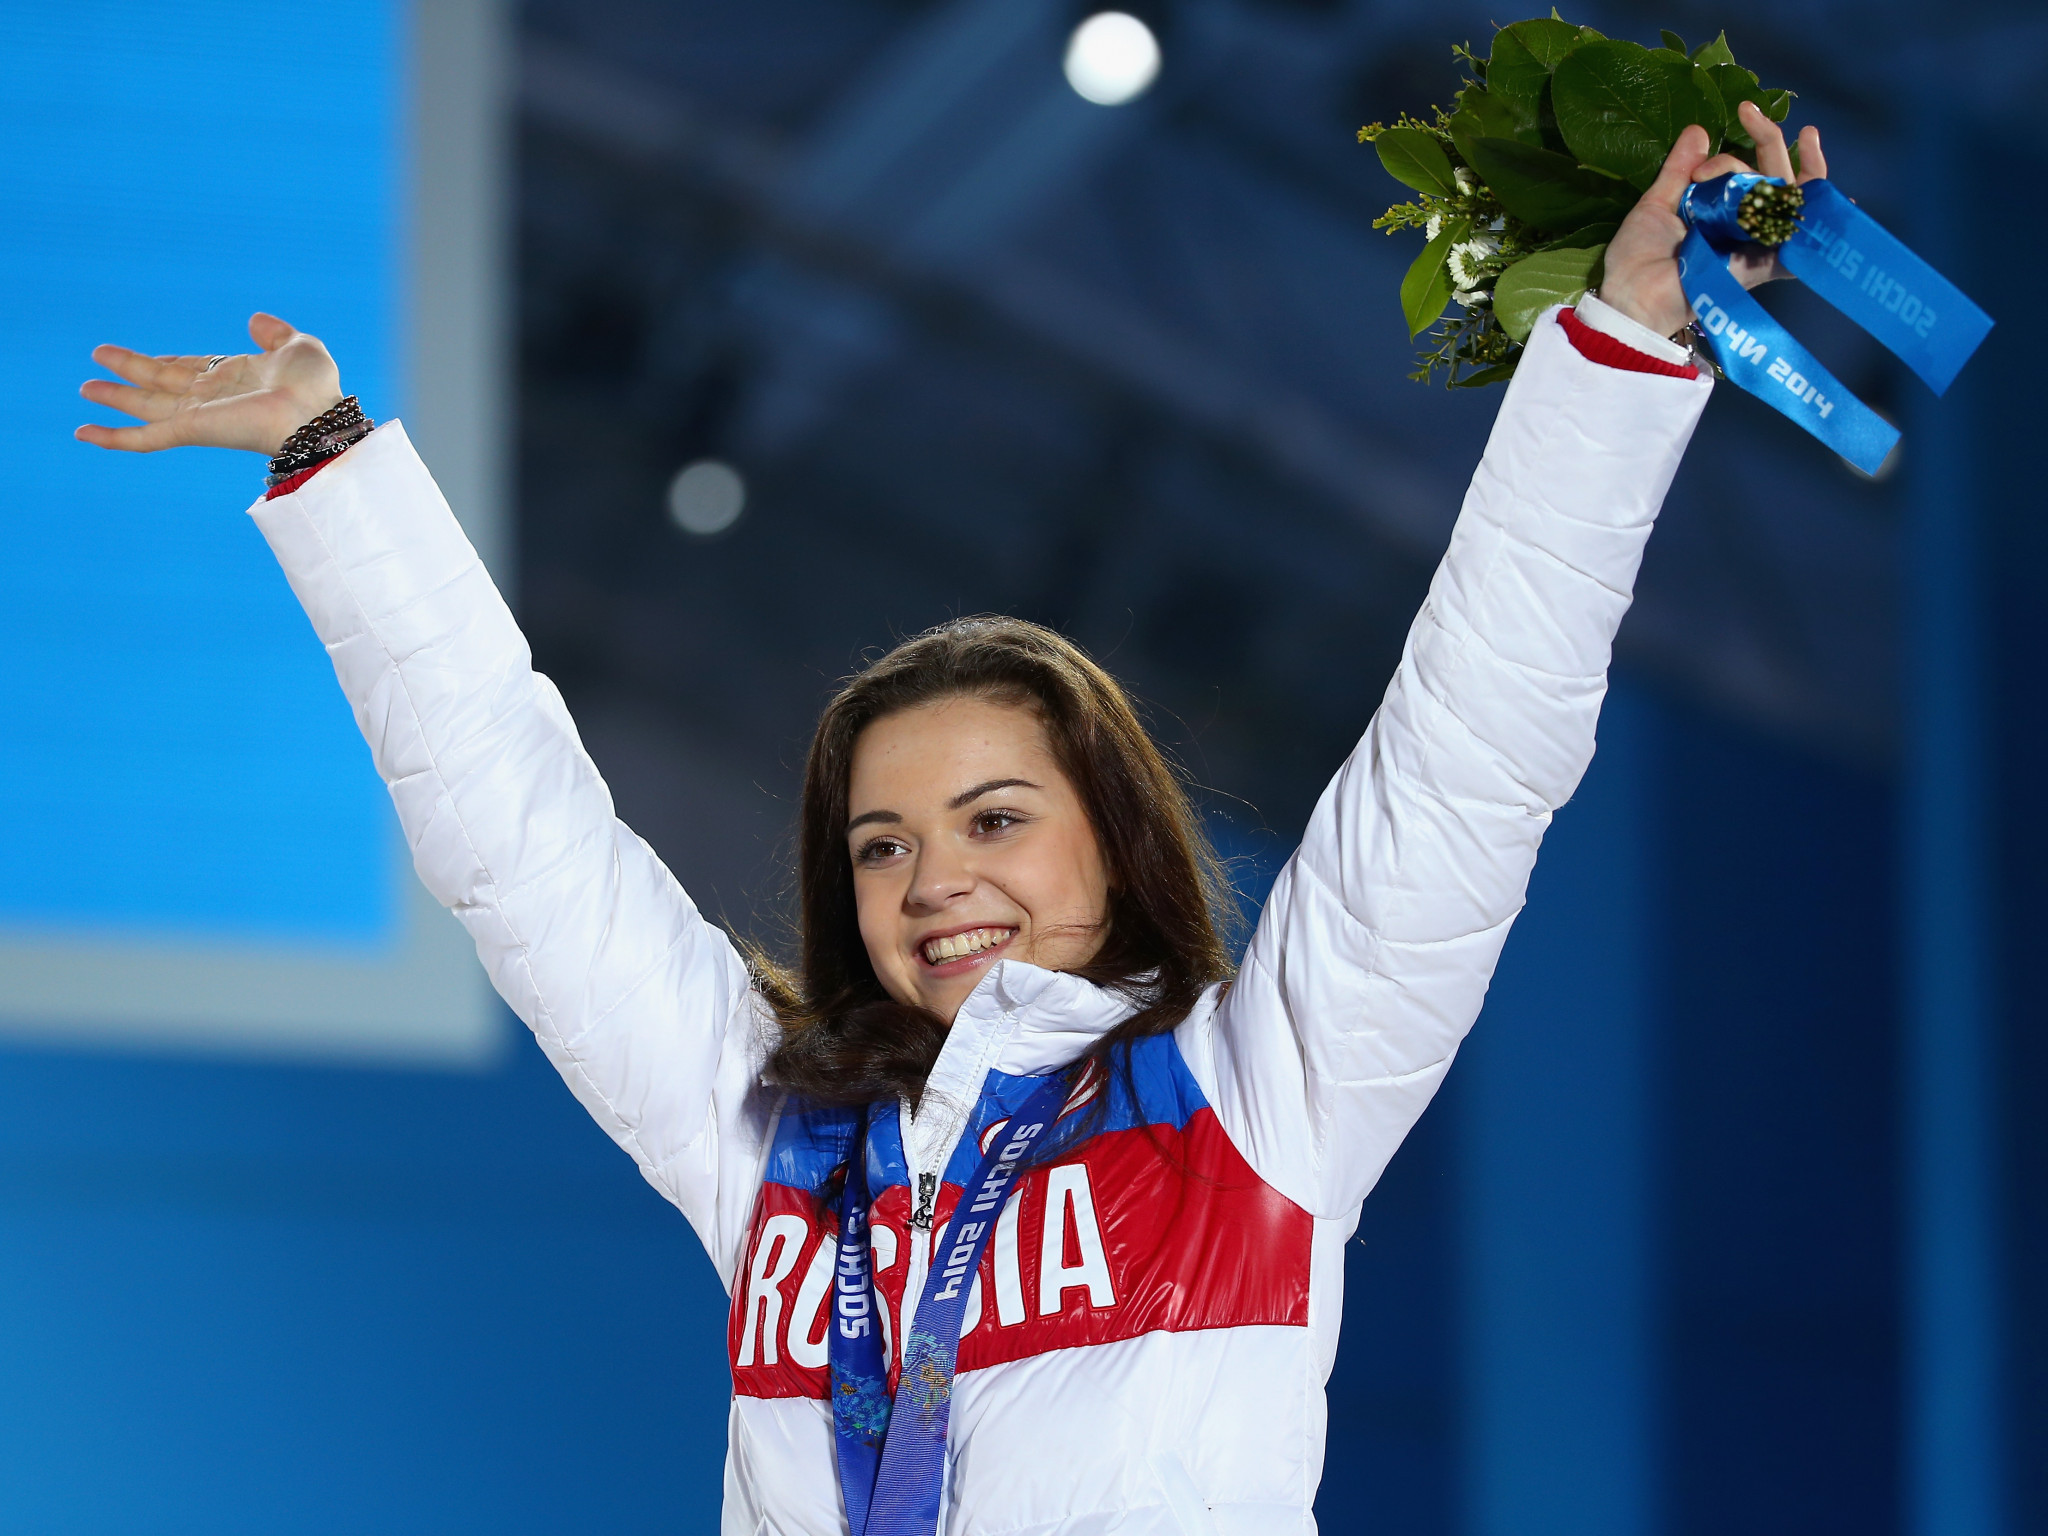 Adelina Sotnikova earned gold for Russia at the Sochi 2014 Winter Olympic Games, although her victory was somewhat controversial ©Getty Images